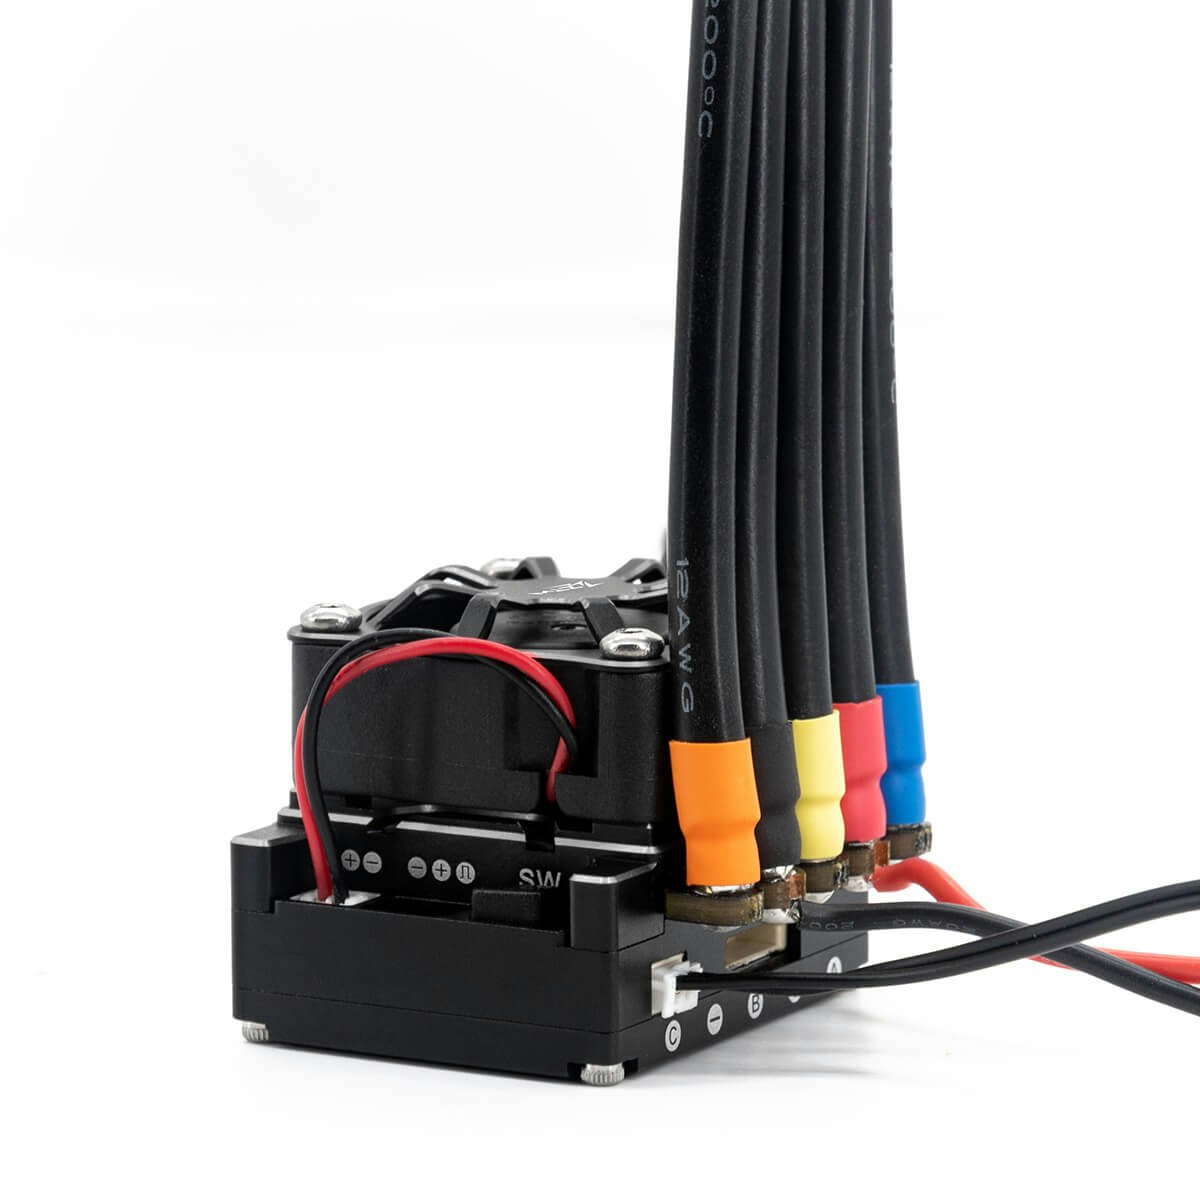 ZTW – Beast 2 – 160A Competition ESC w/build in Bluetooth